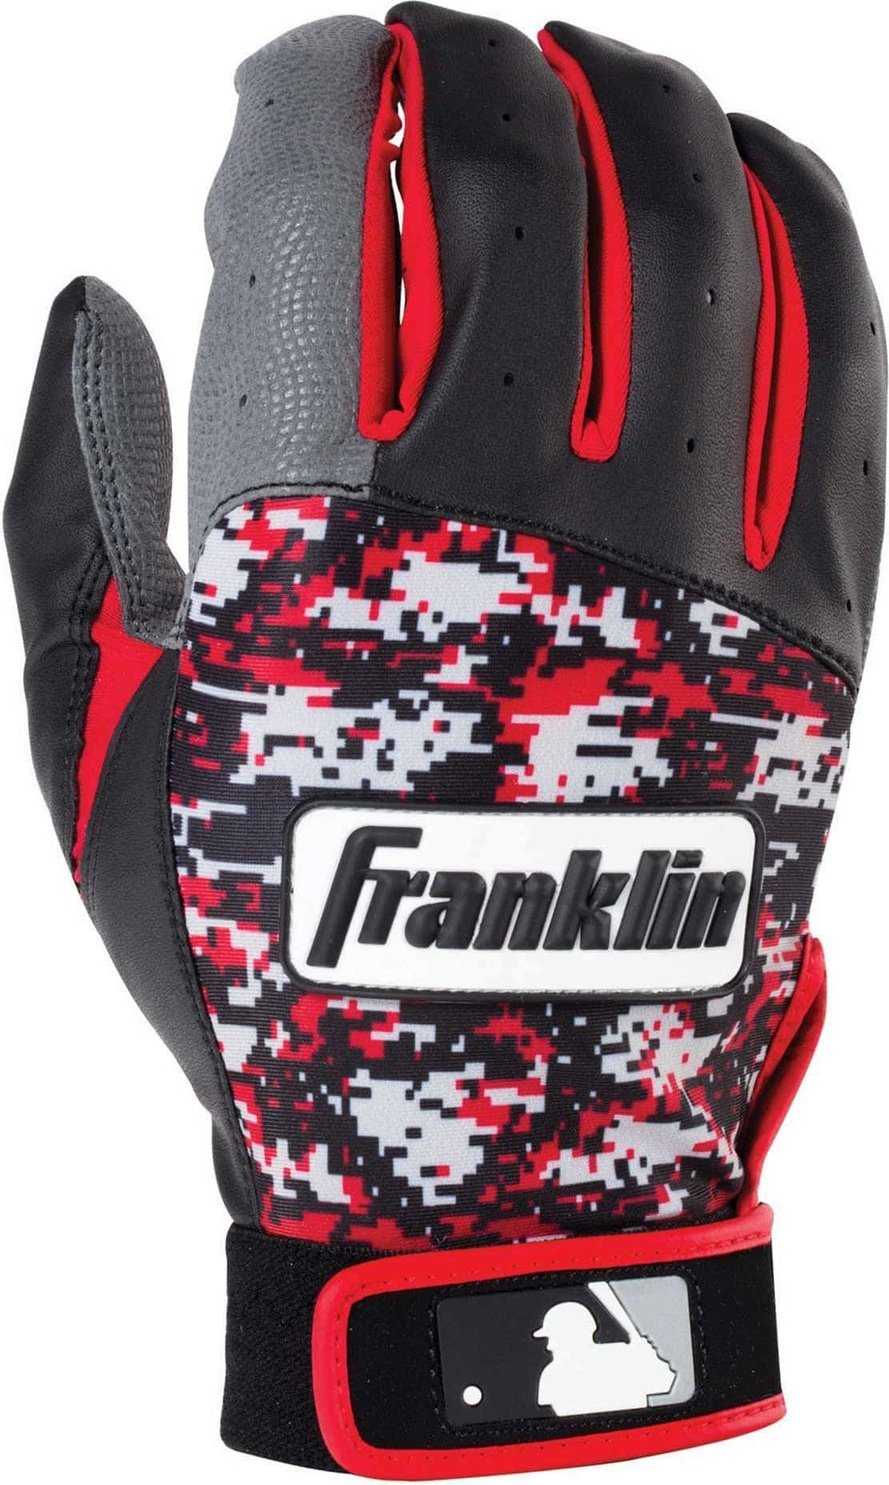 Dominate - CAMO RED/BLACK BATTING GLOVES - Batting Gloves - Accessories -  Shop - Baseball and Softball Gloves. 100% pelle.